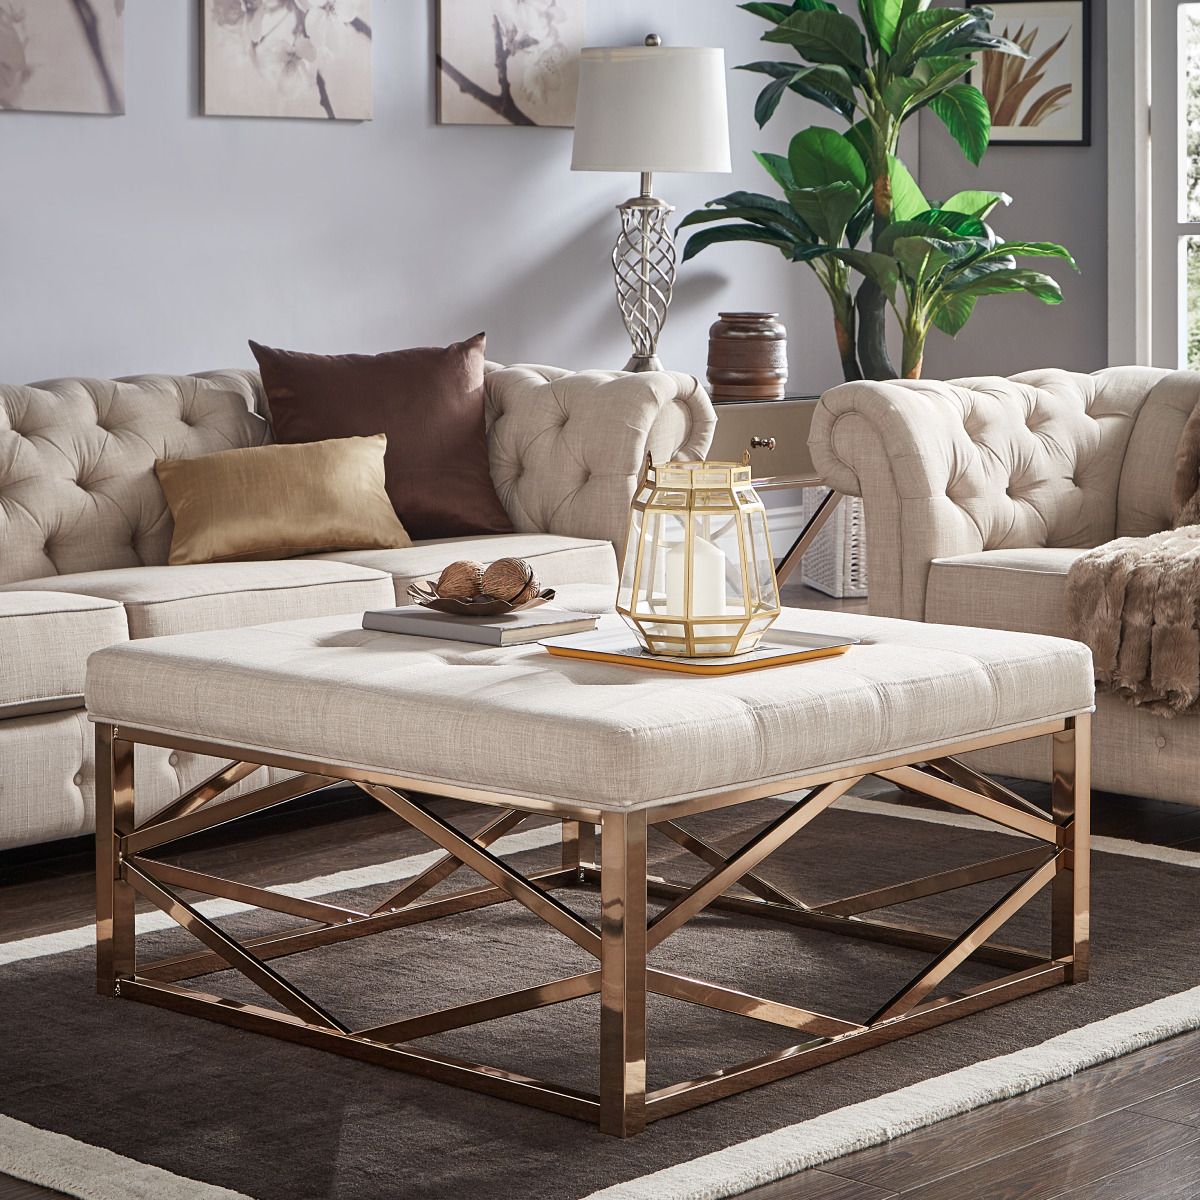 2020 Tufted Ottoman Console Tables With Regard To Weston Home Libby Dimpled Tufted Cushion Ottoman Coffee (View 3 of 10)